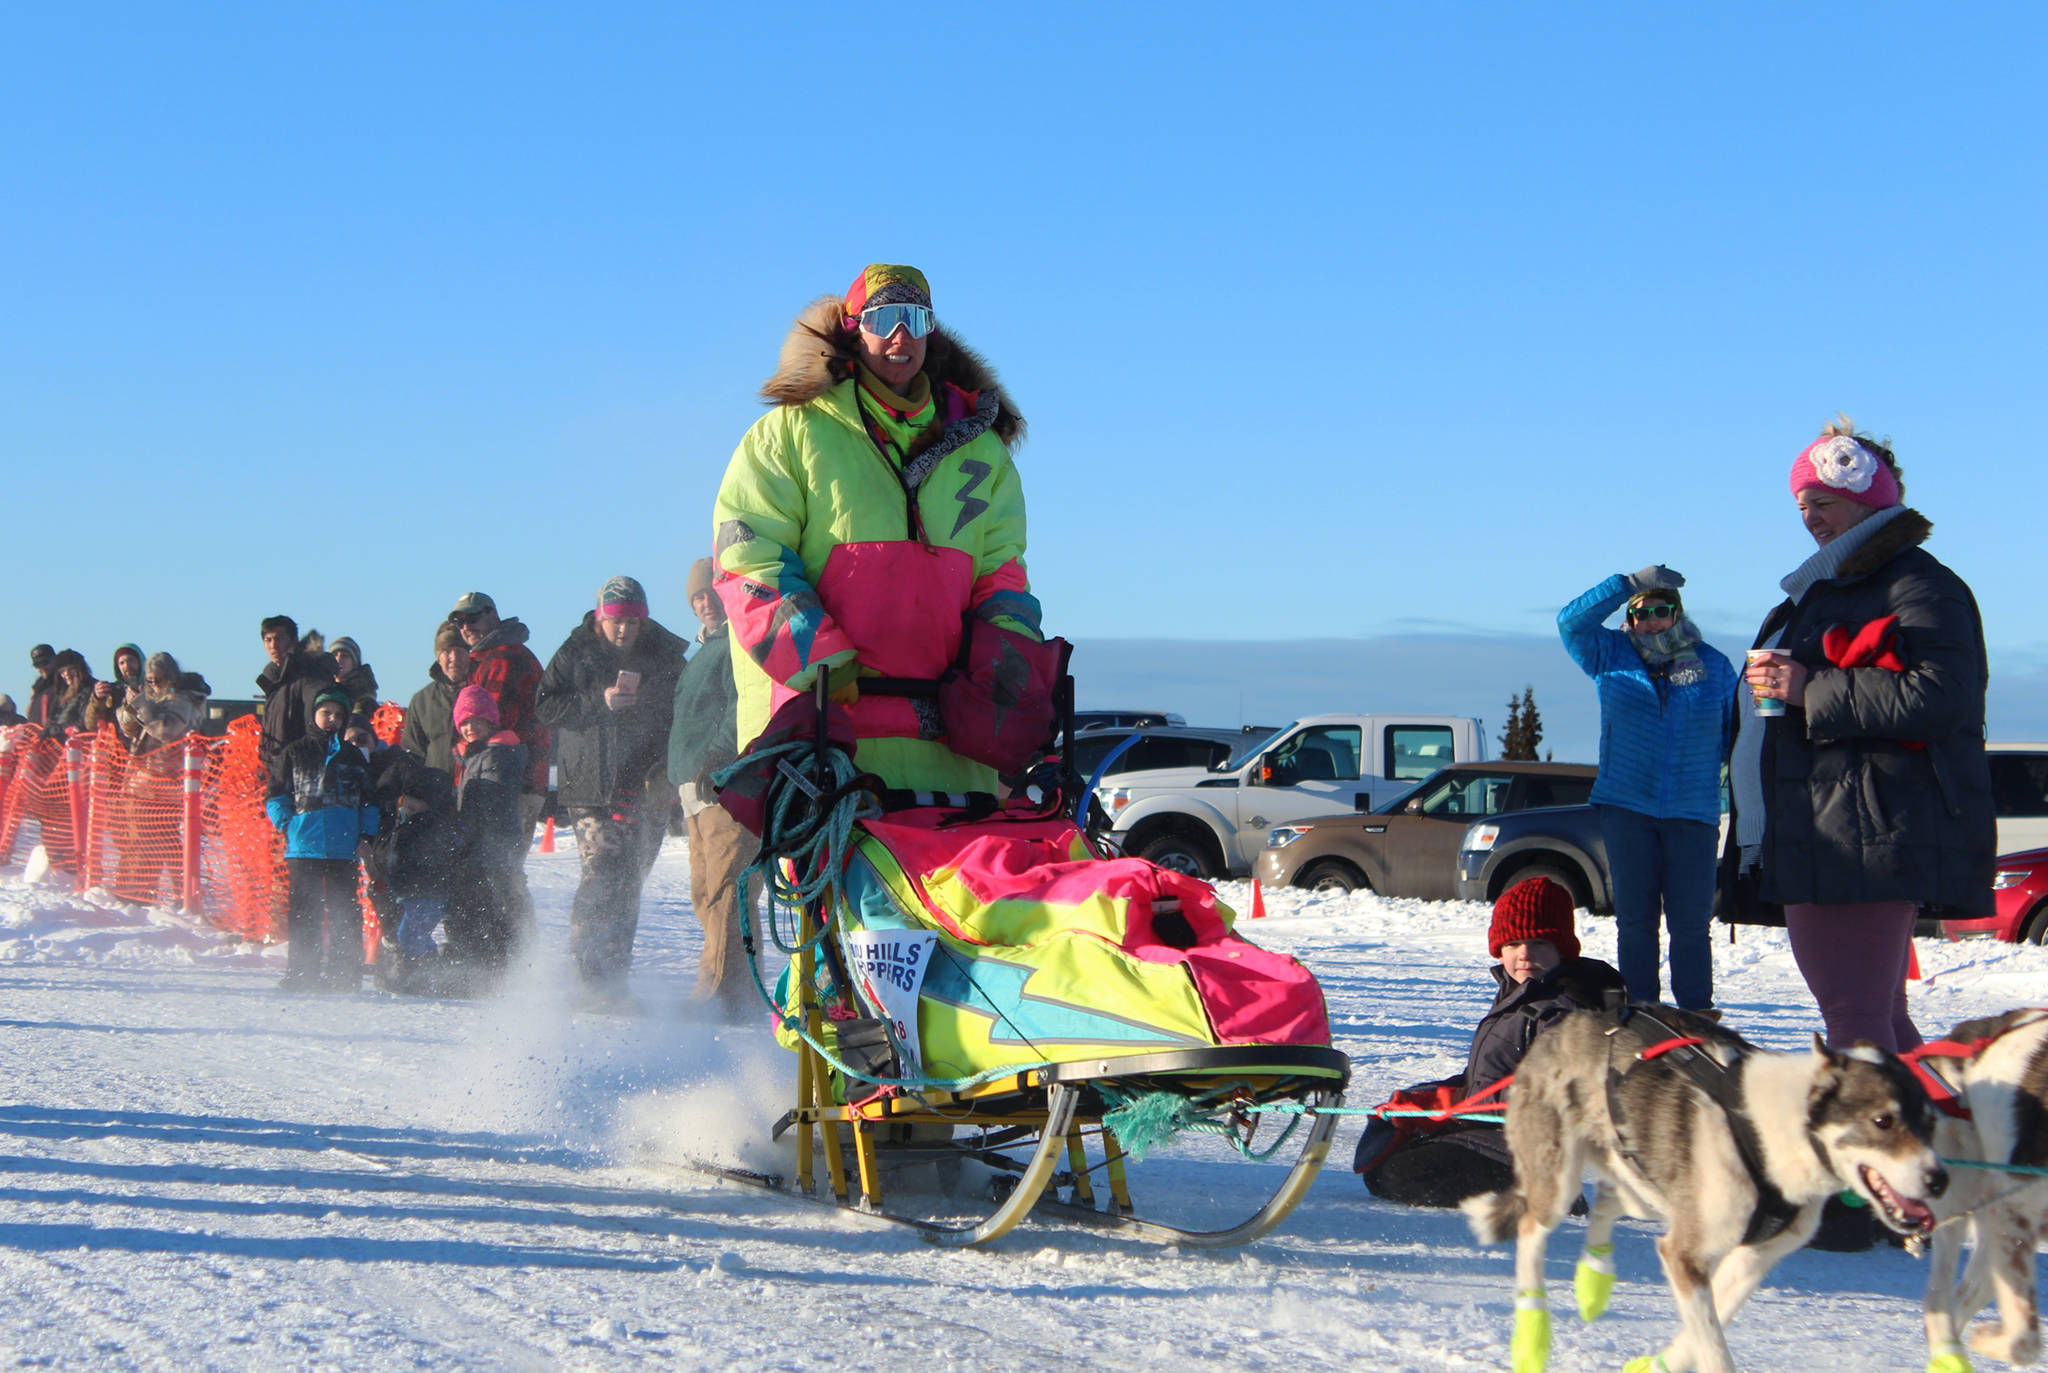 Monica Zappa, in her telltale neon garb, takes off with her team from the starting line of this year’s Tustumena 200 Sled Dog Race on Saturday, Jan. 27, 2018 at Freddie’s Roadhouse in Ninilchik, Alaska. (Photo by Megan Pacer/Homer News)